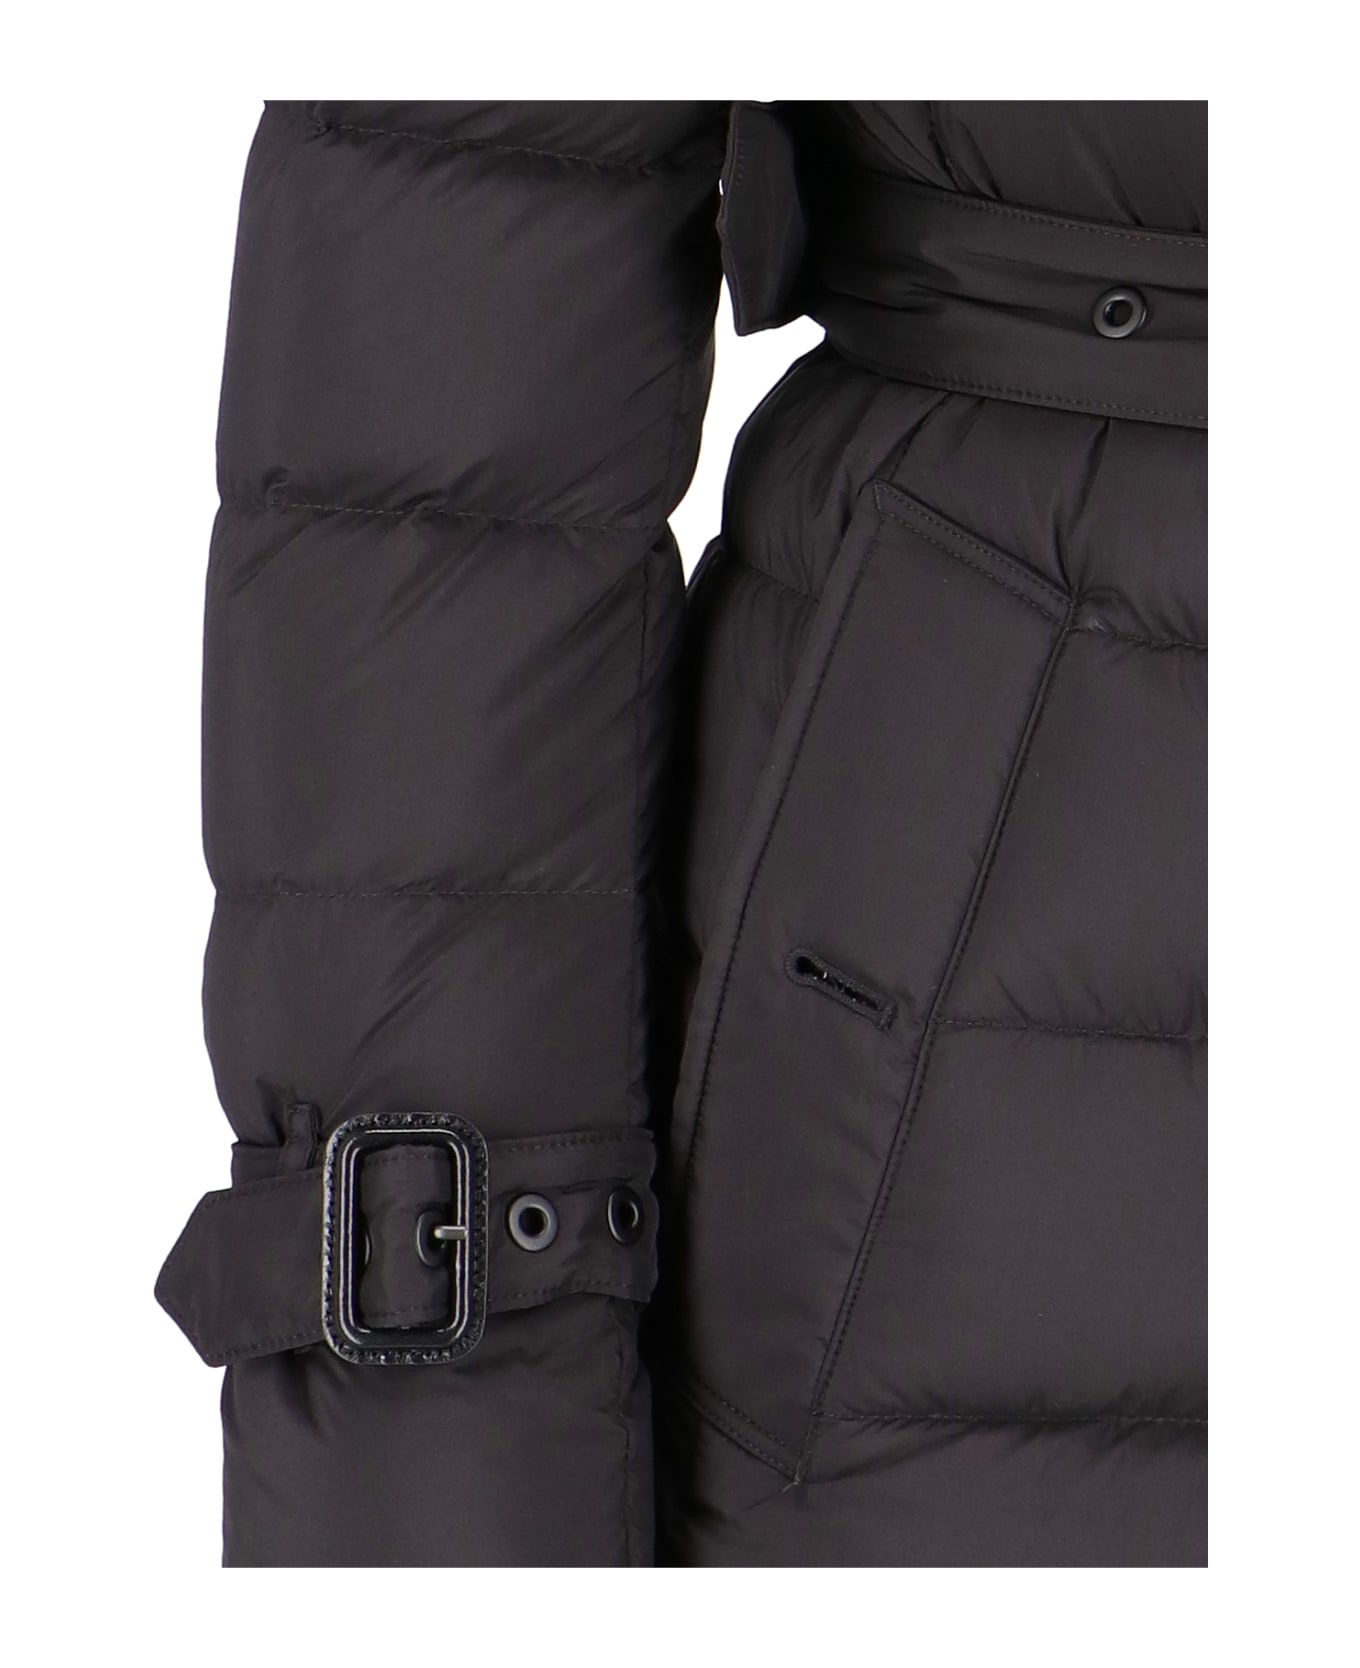 Burberry Long Black Belted Down Jacket With Removable Hood In Nylon Woman - Black